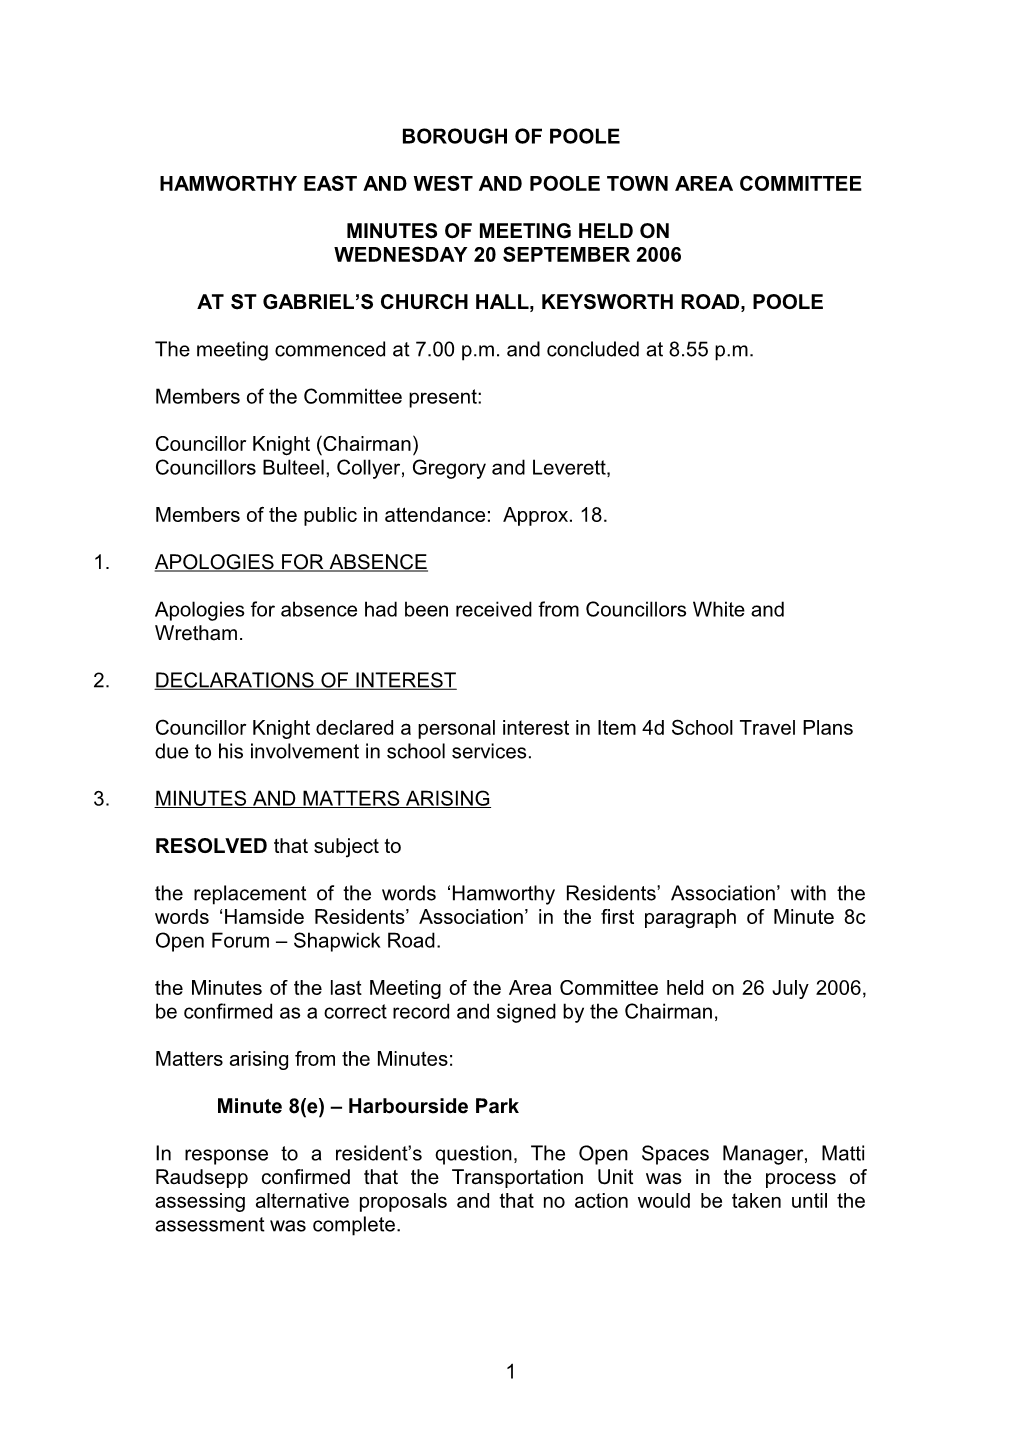 Hamworthy East and West and Poole Town Area Committee Minutes - 20 September 2006